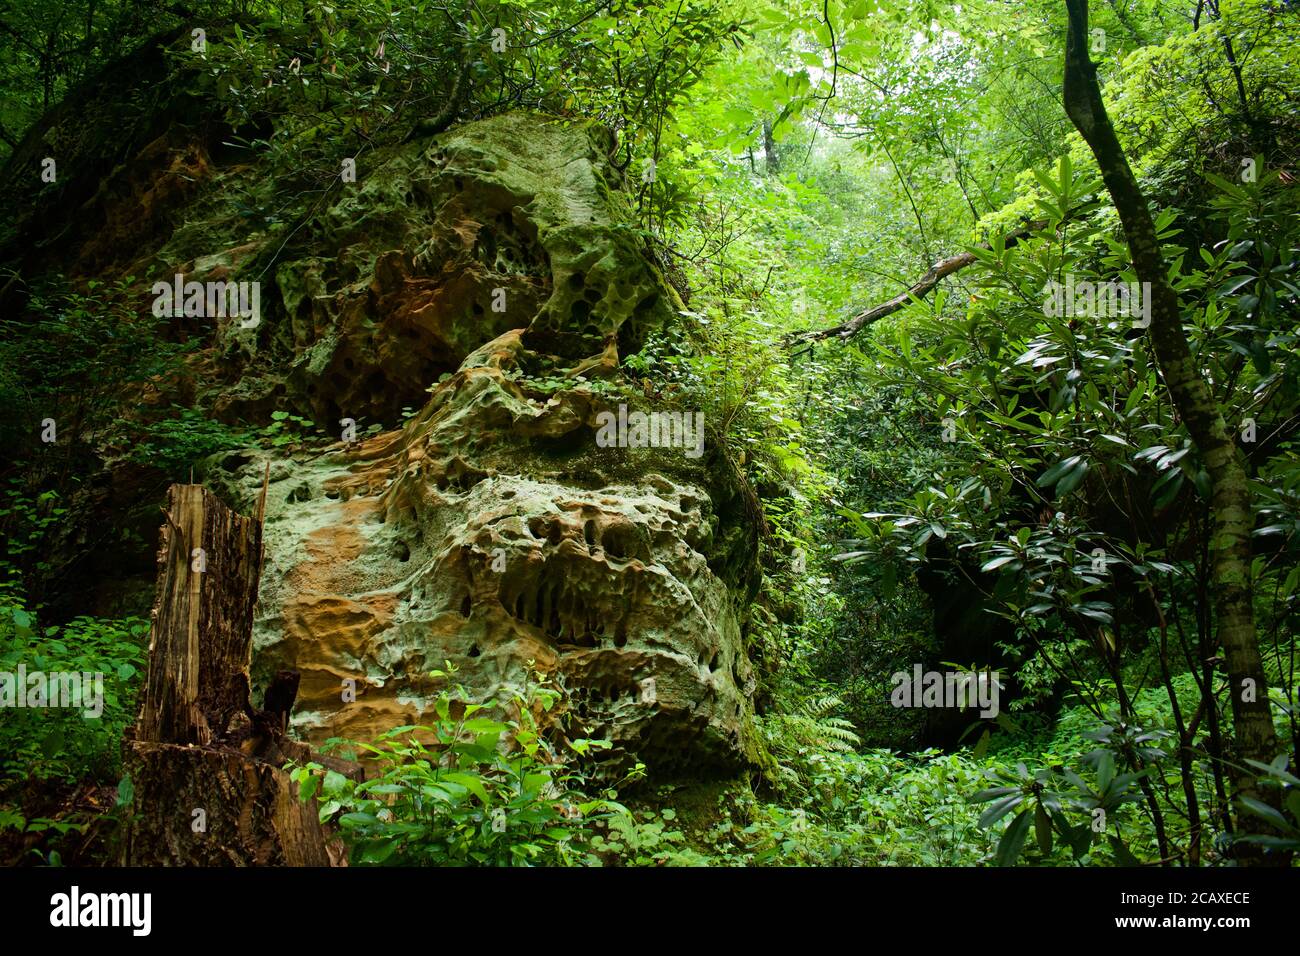 Natural Bridge, Kentucky. Beautiful rock structure covered in green plants. Stock Photo